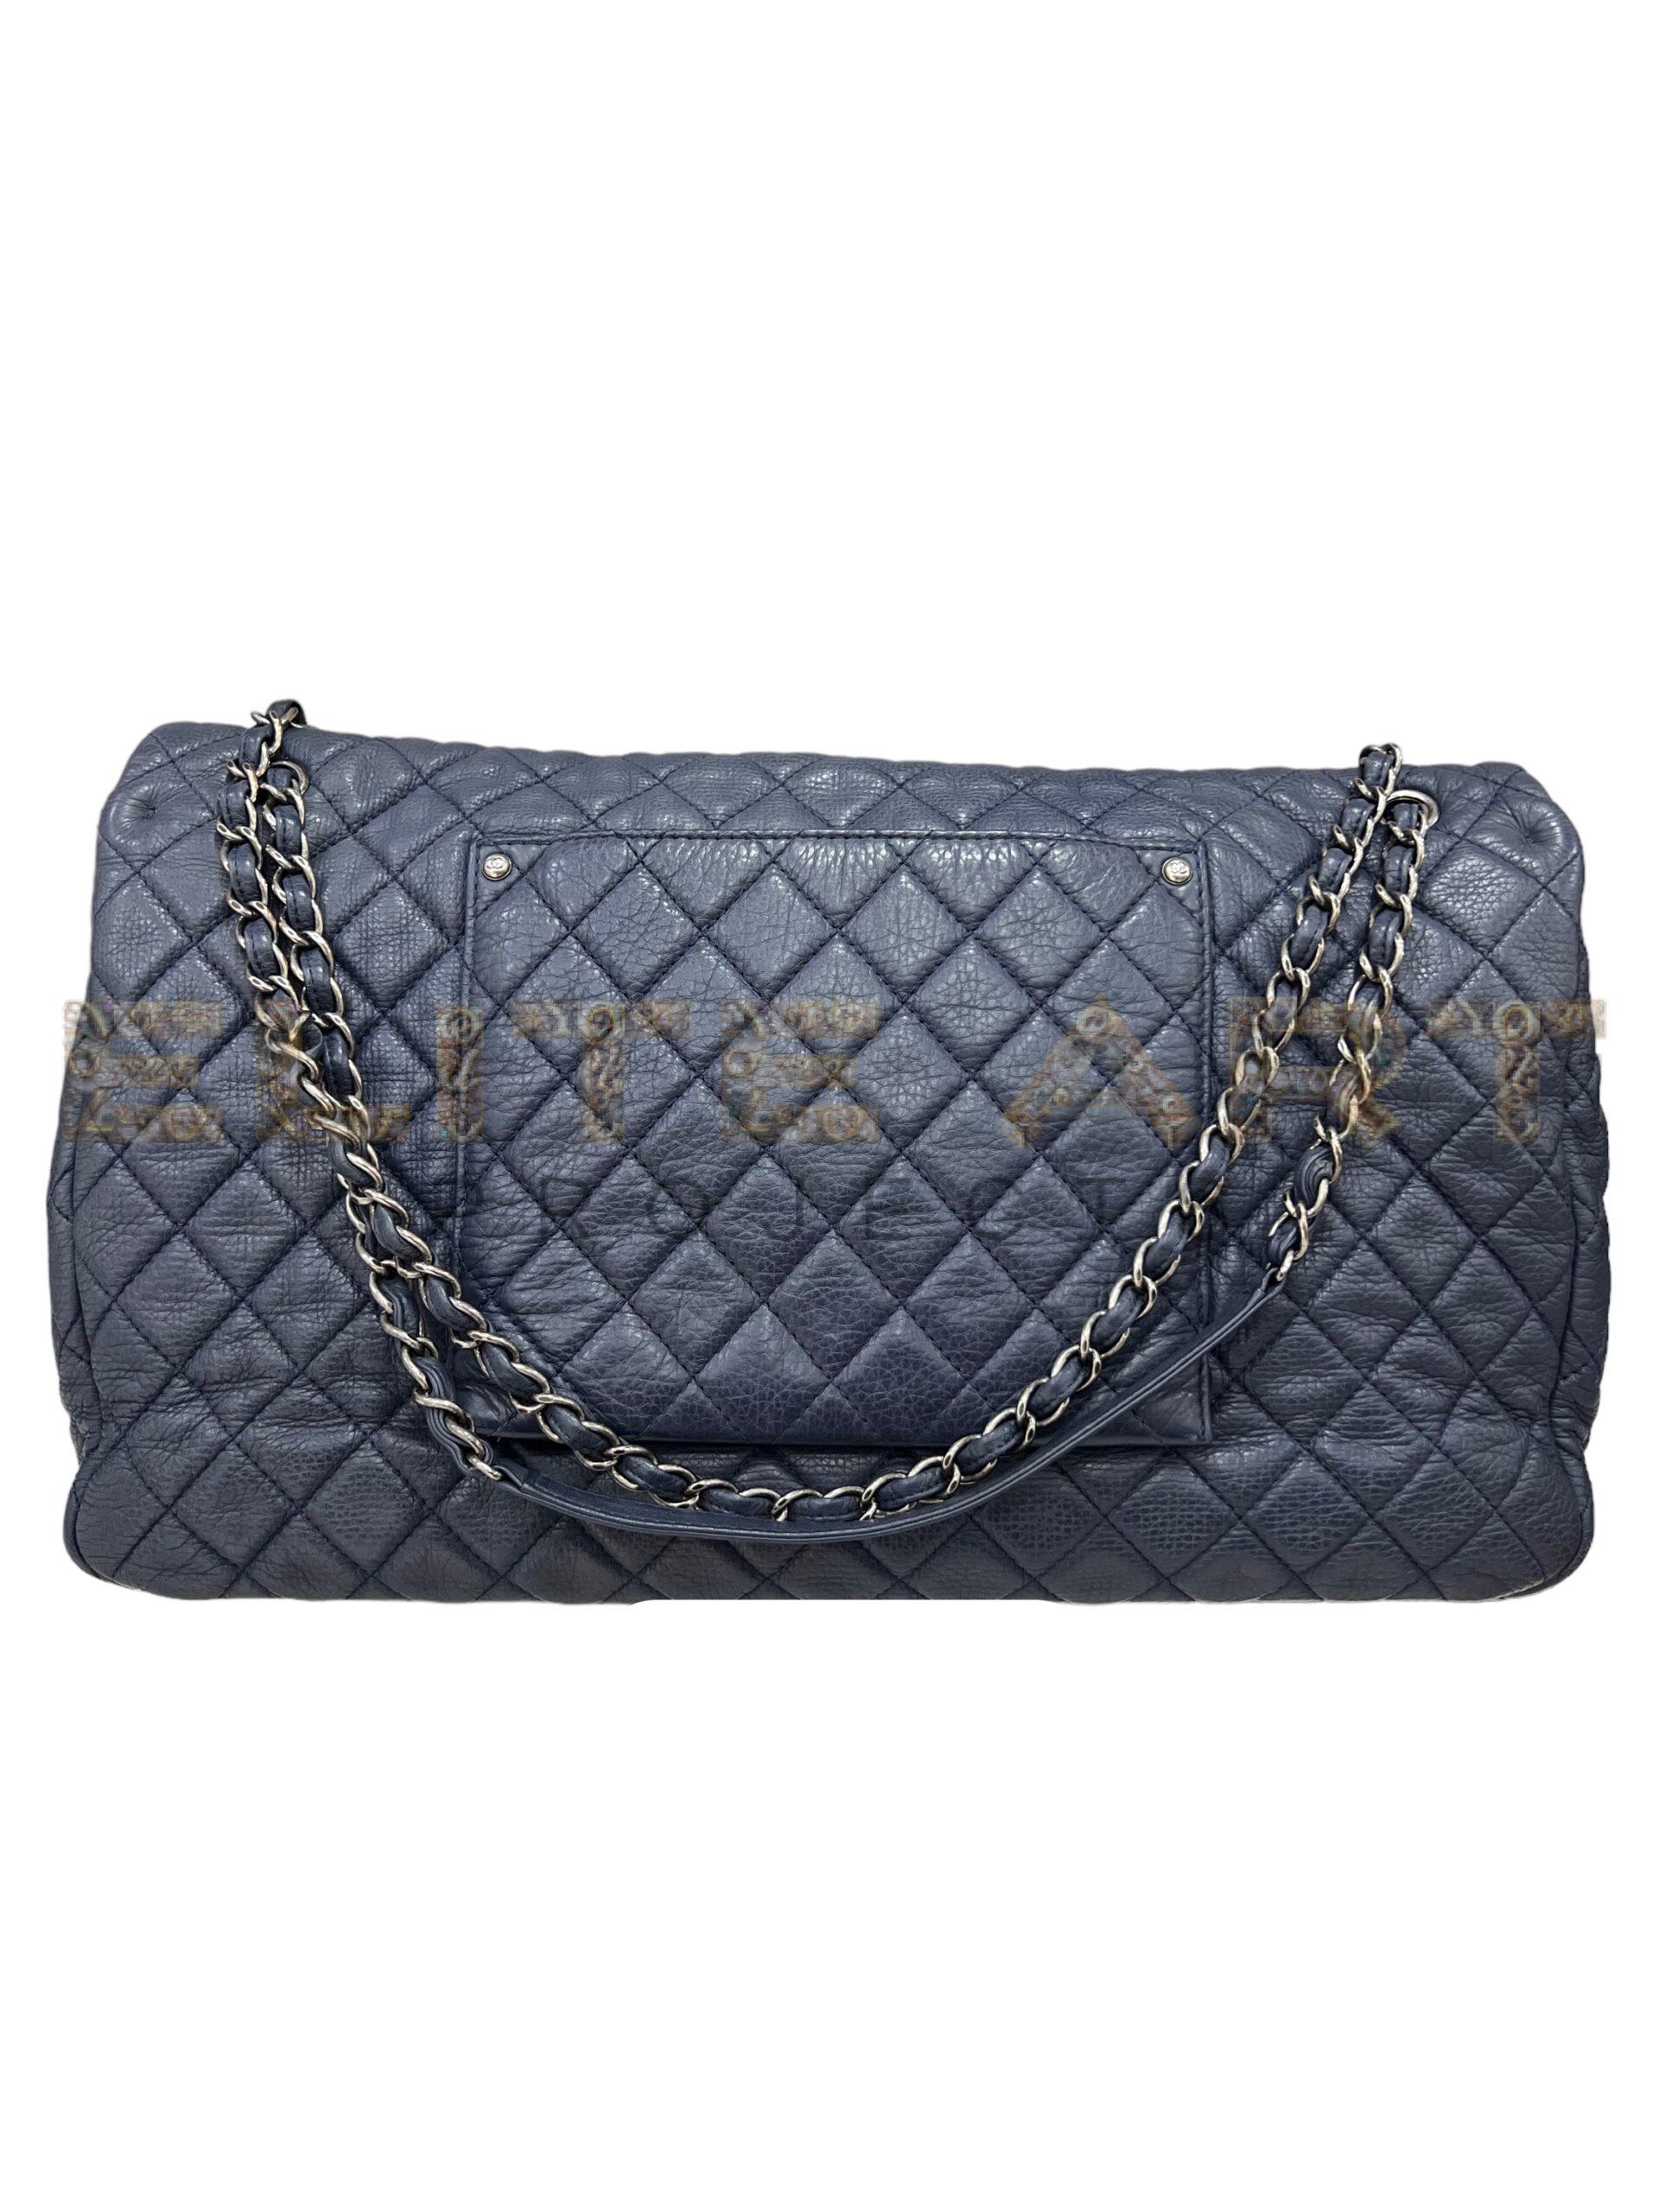 Chanel, Timeless travel bag, quilted leather, blue, silver accents, CC logo, spacious, practical